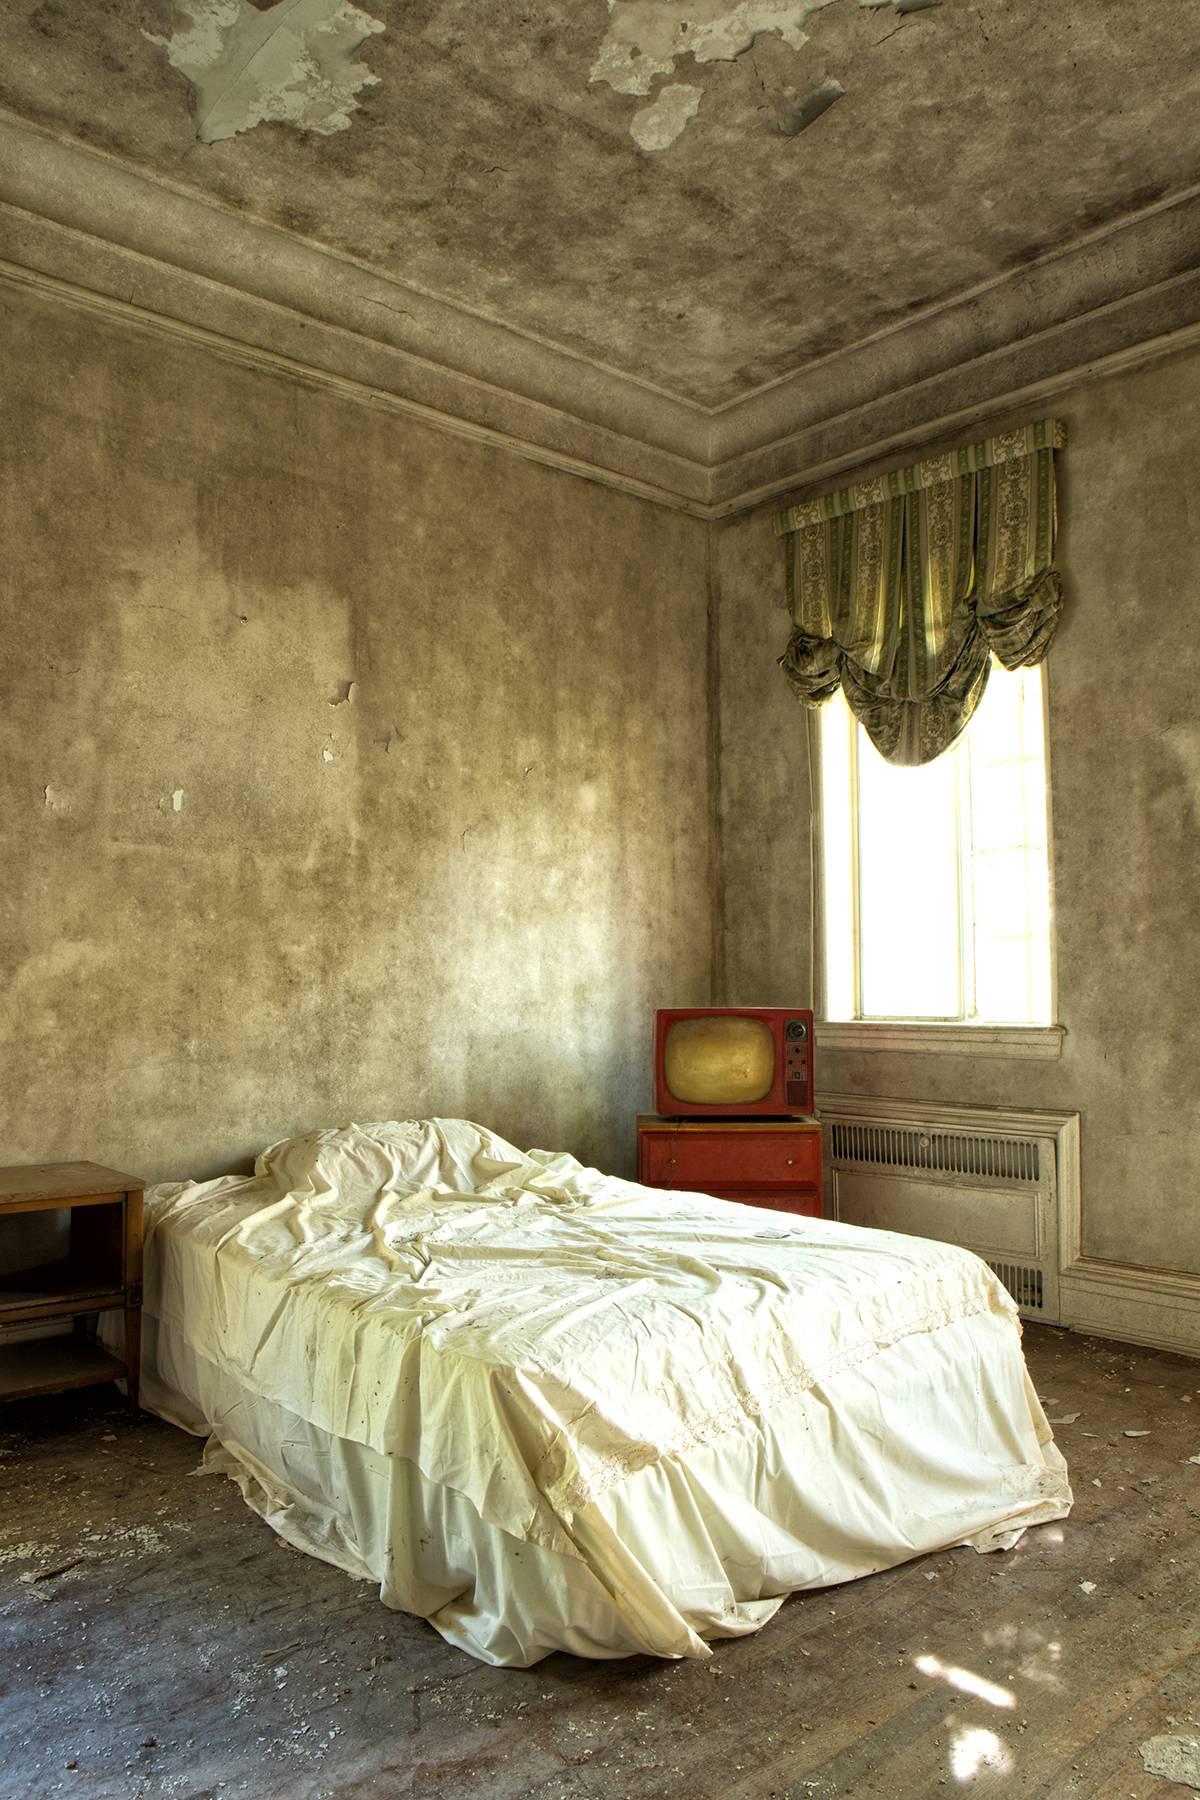 "Momentary", contemporary, abandoned, home, bedroom, red, color photograph